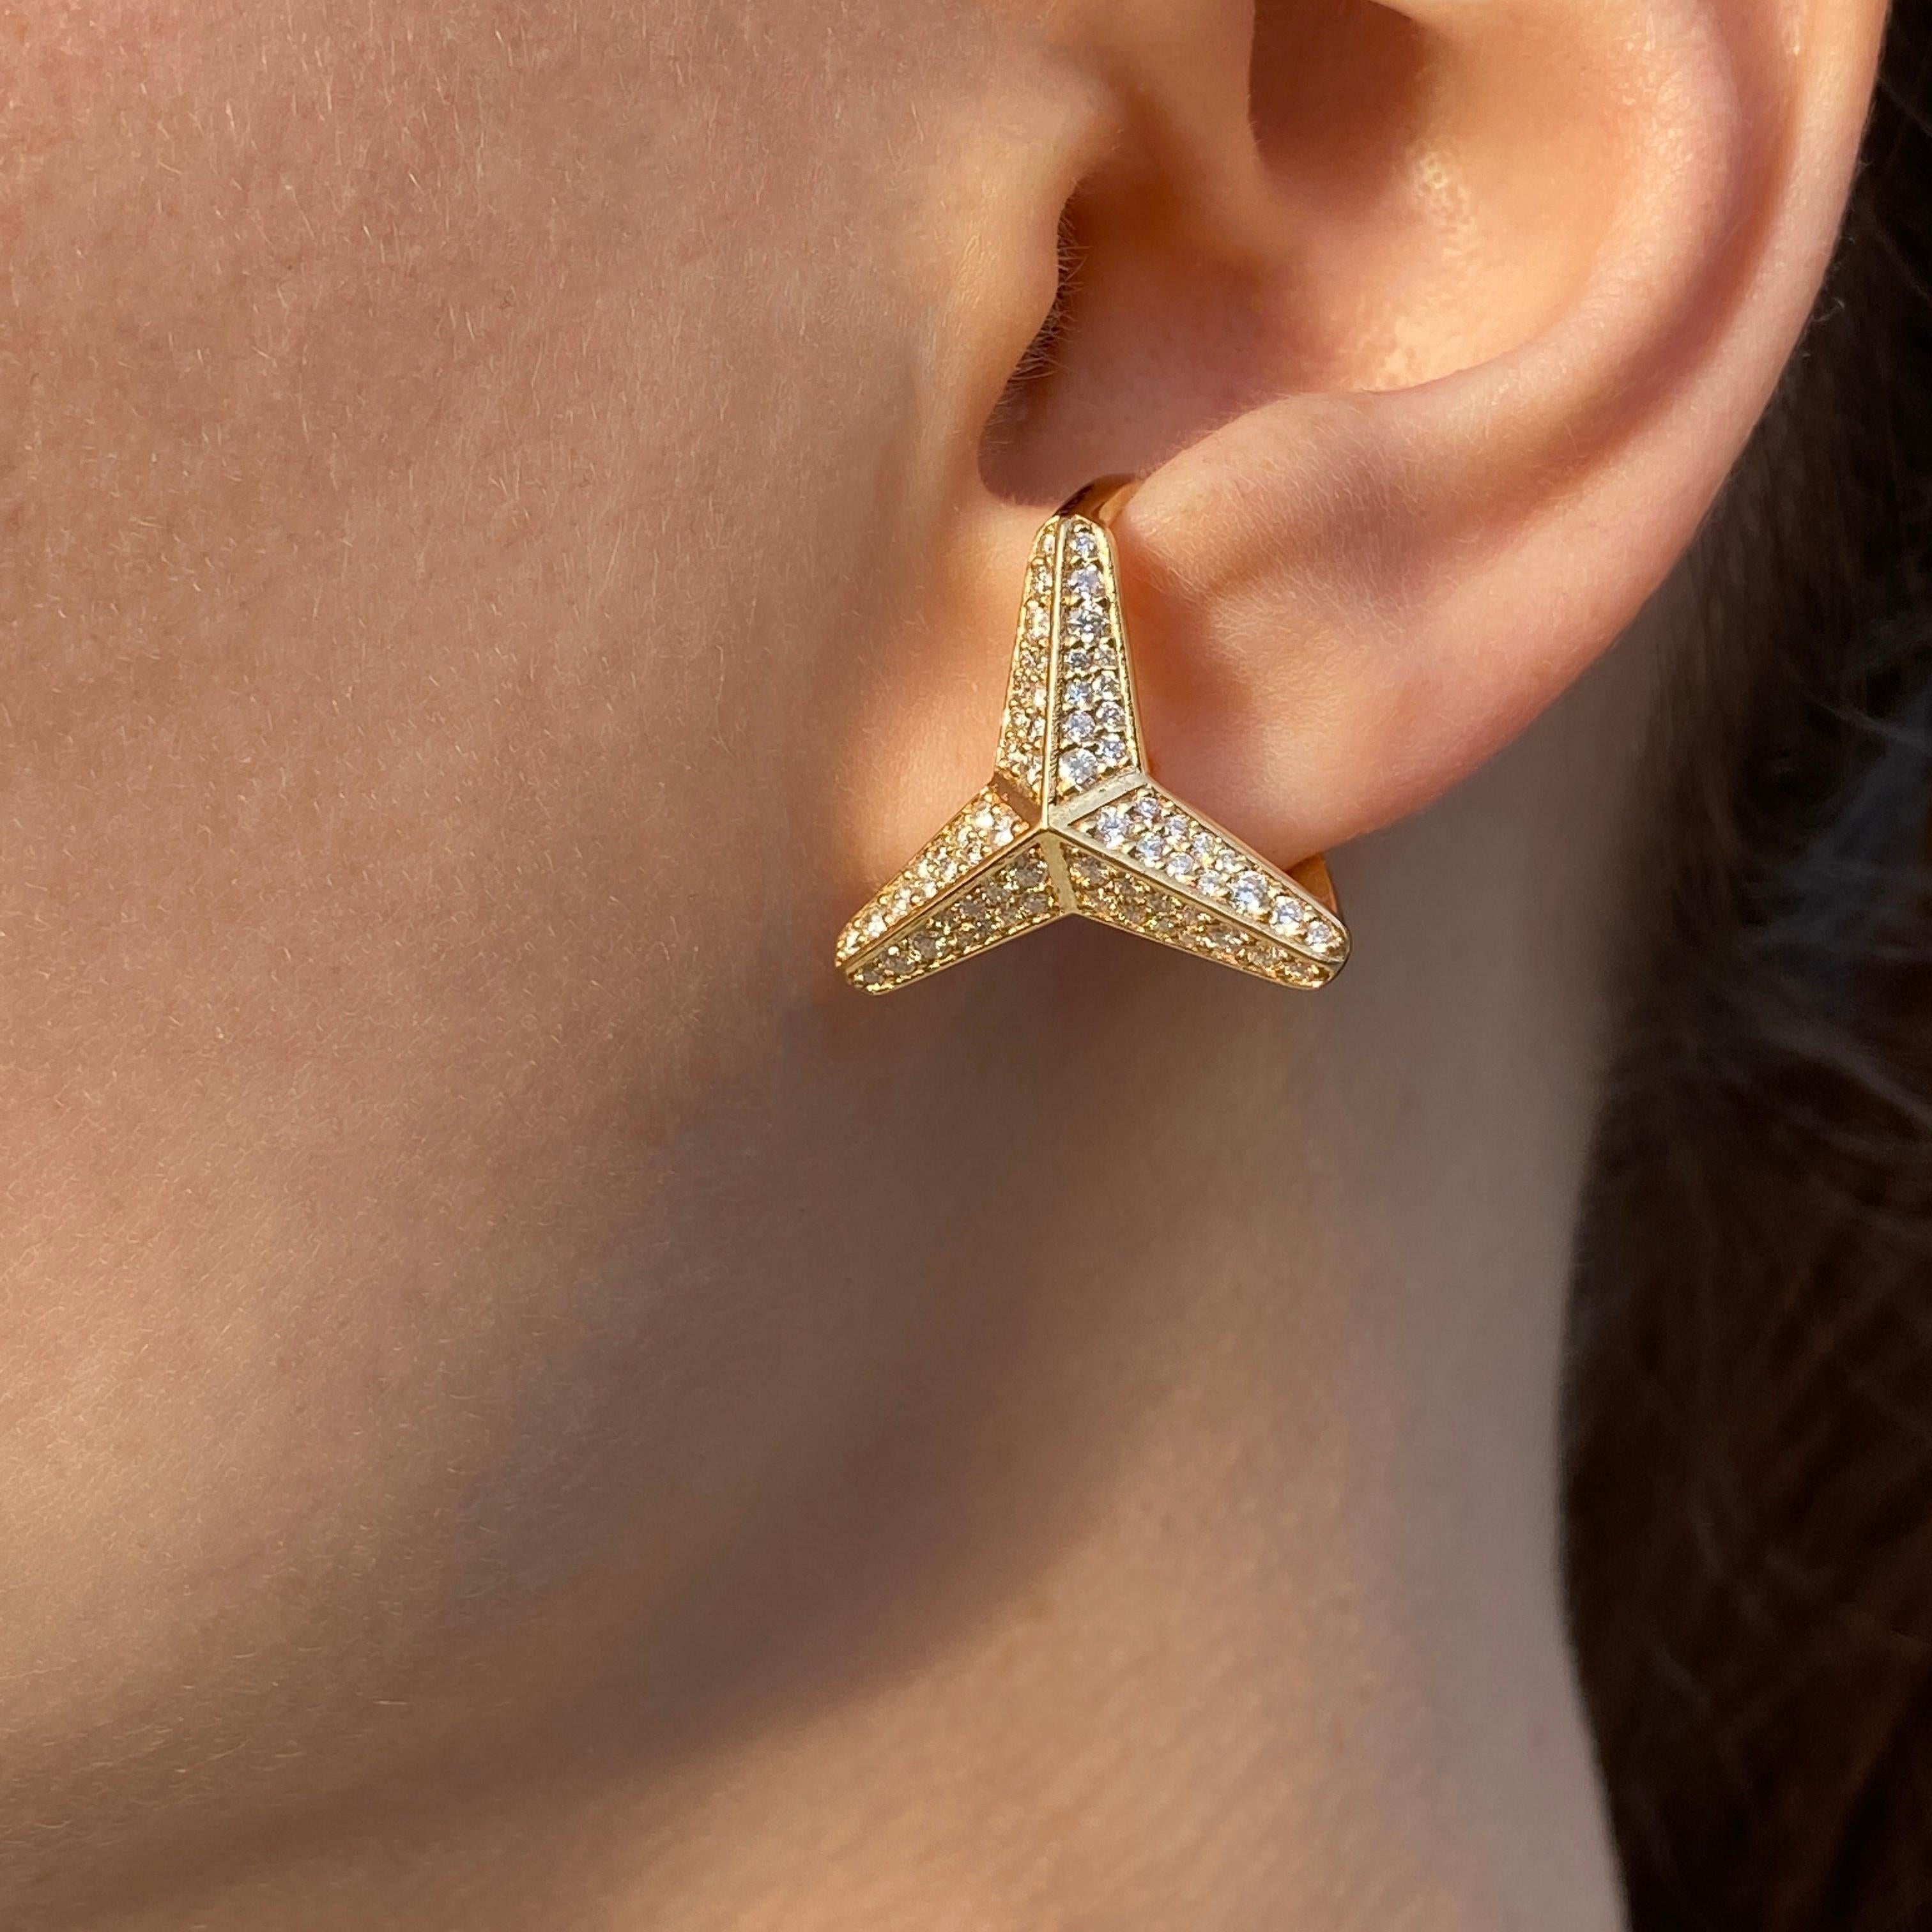 Maria Kotsoni Contemporary 18k Gold Three Pointed Star Large Diamond Ear Cuff For Sale 3